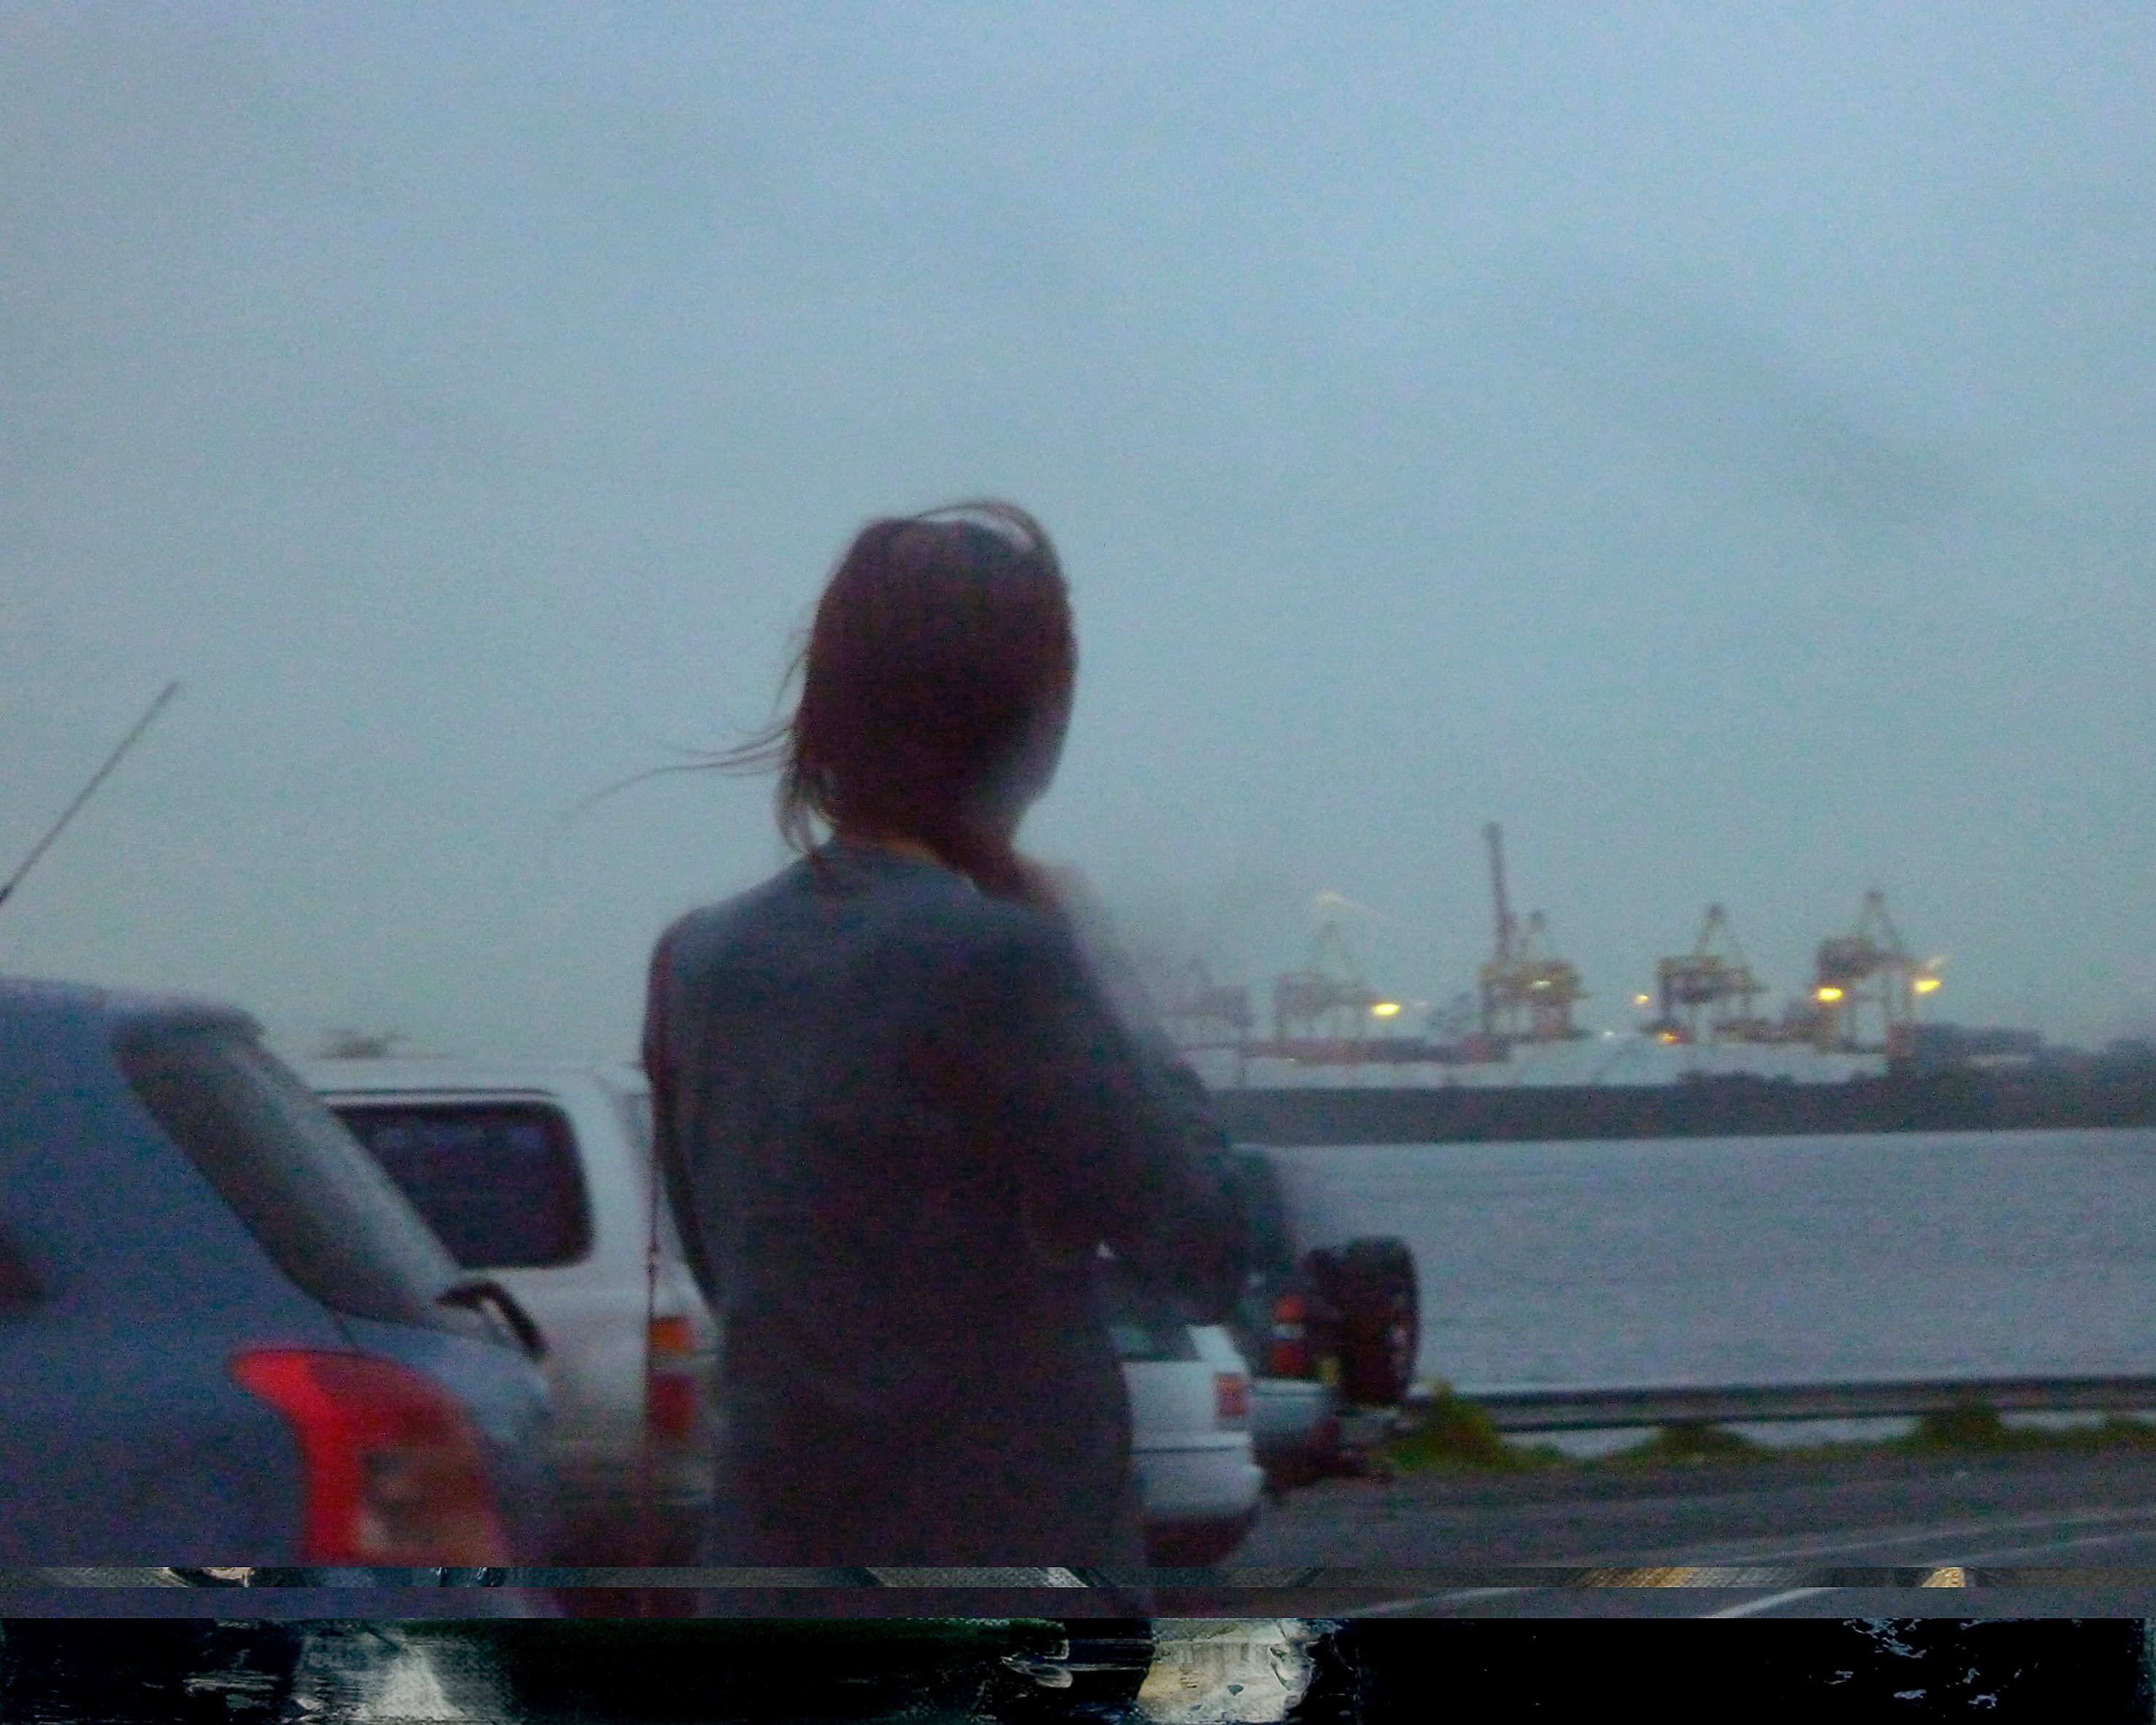 Video still of a woman with long hair looking out over modern day Port Botany.